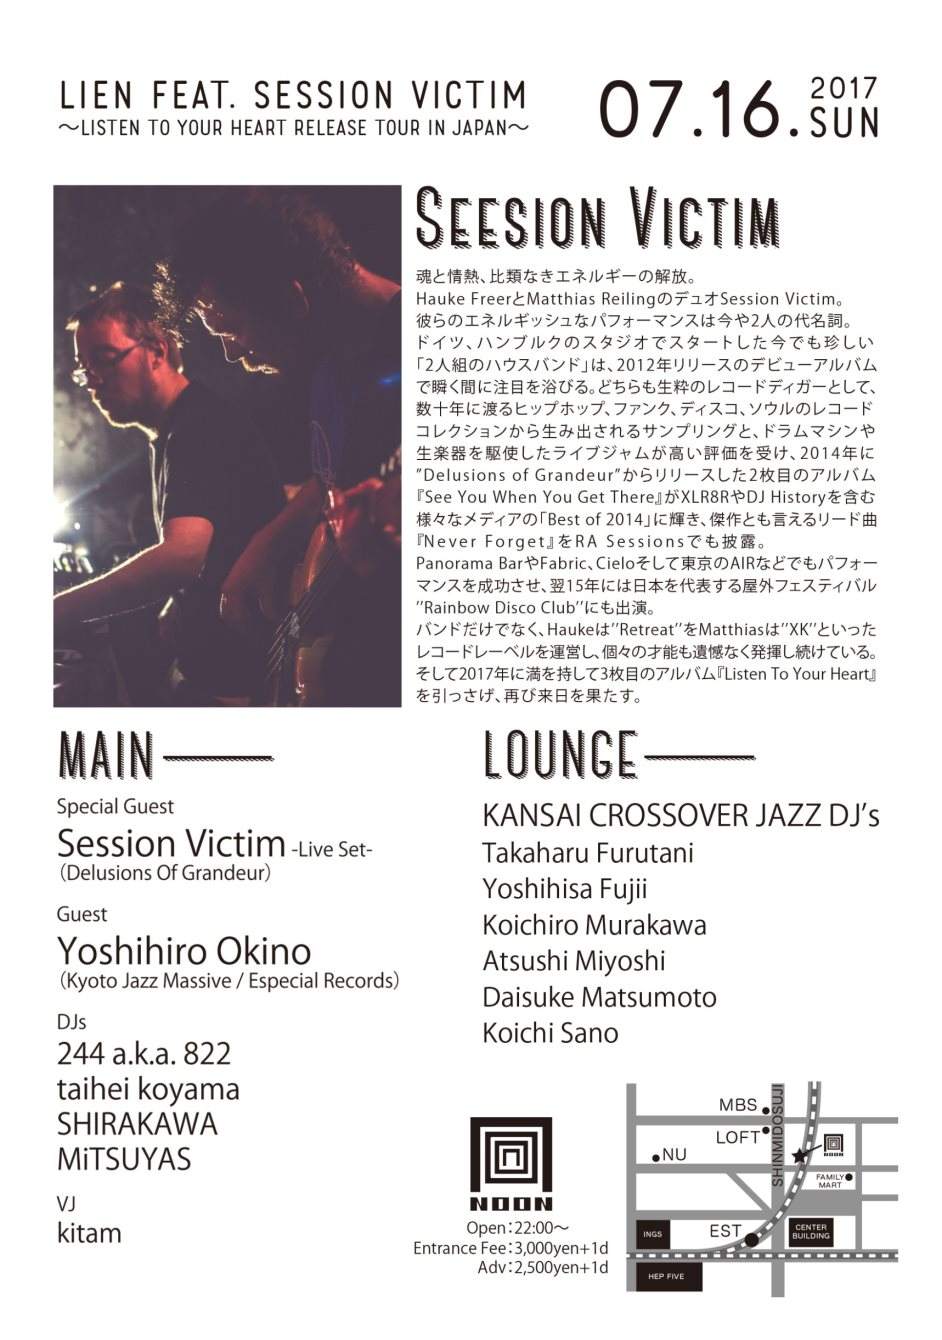 Lien Feat. Session Victim Listen To Your Heart release Tour in Japan - Página trasera